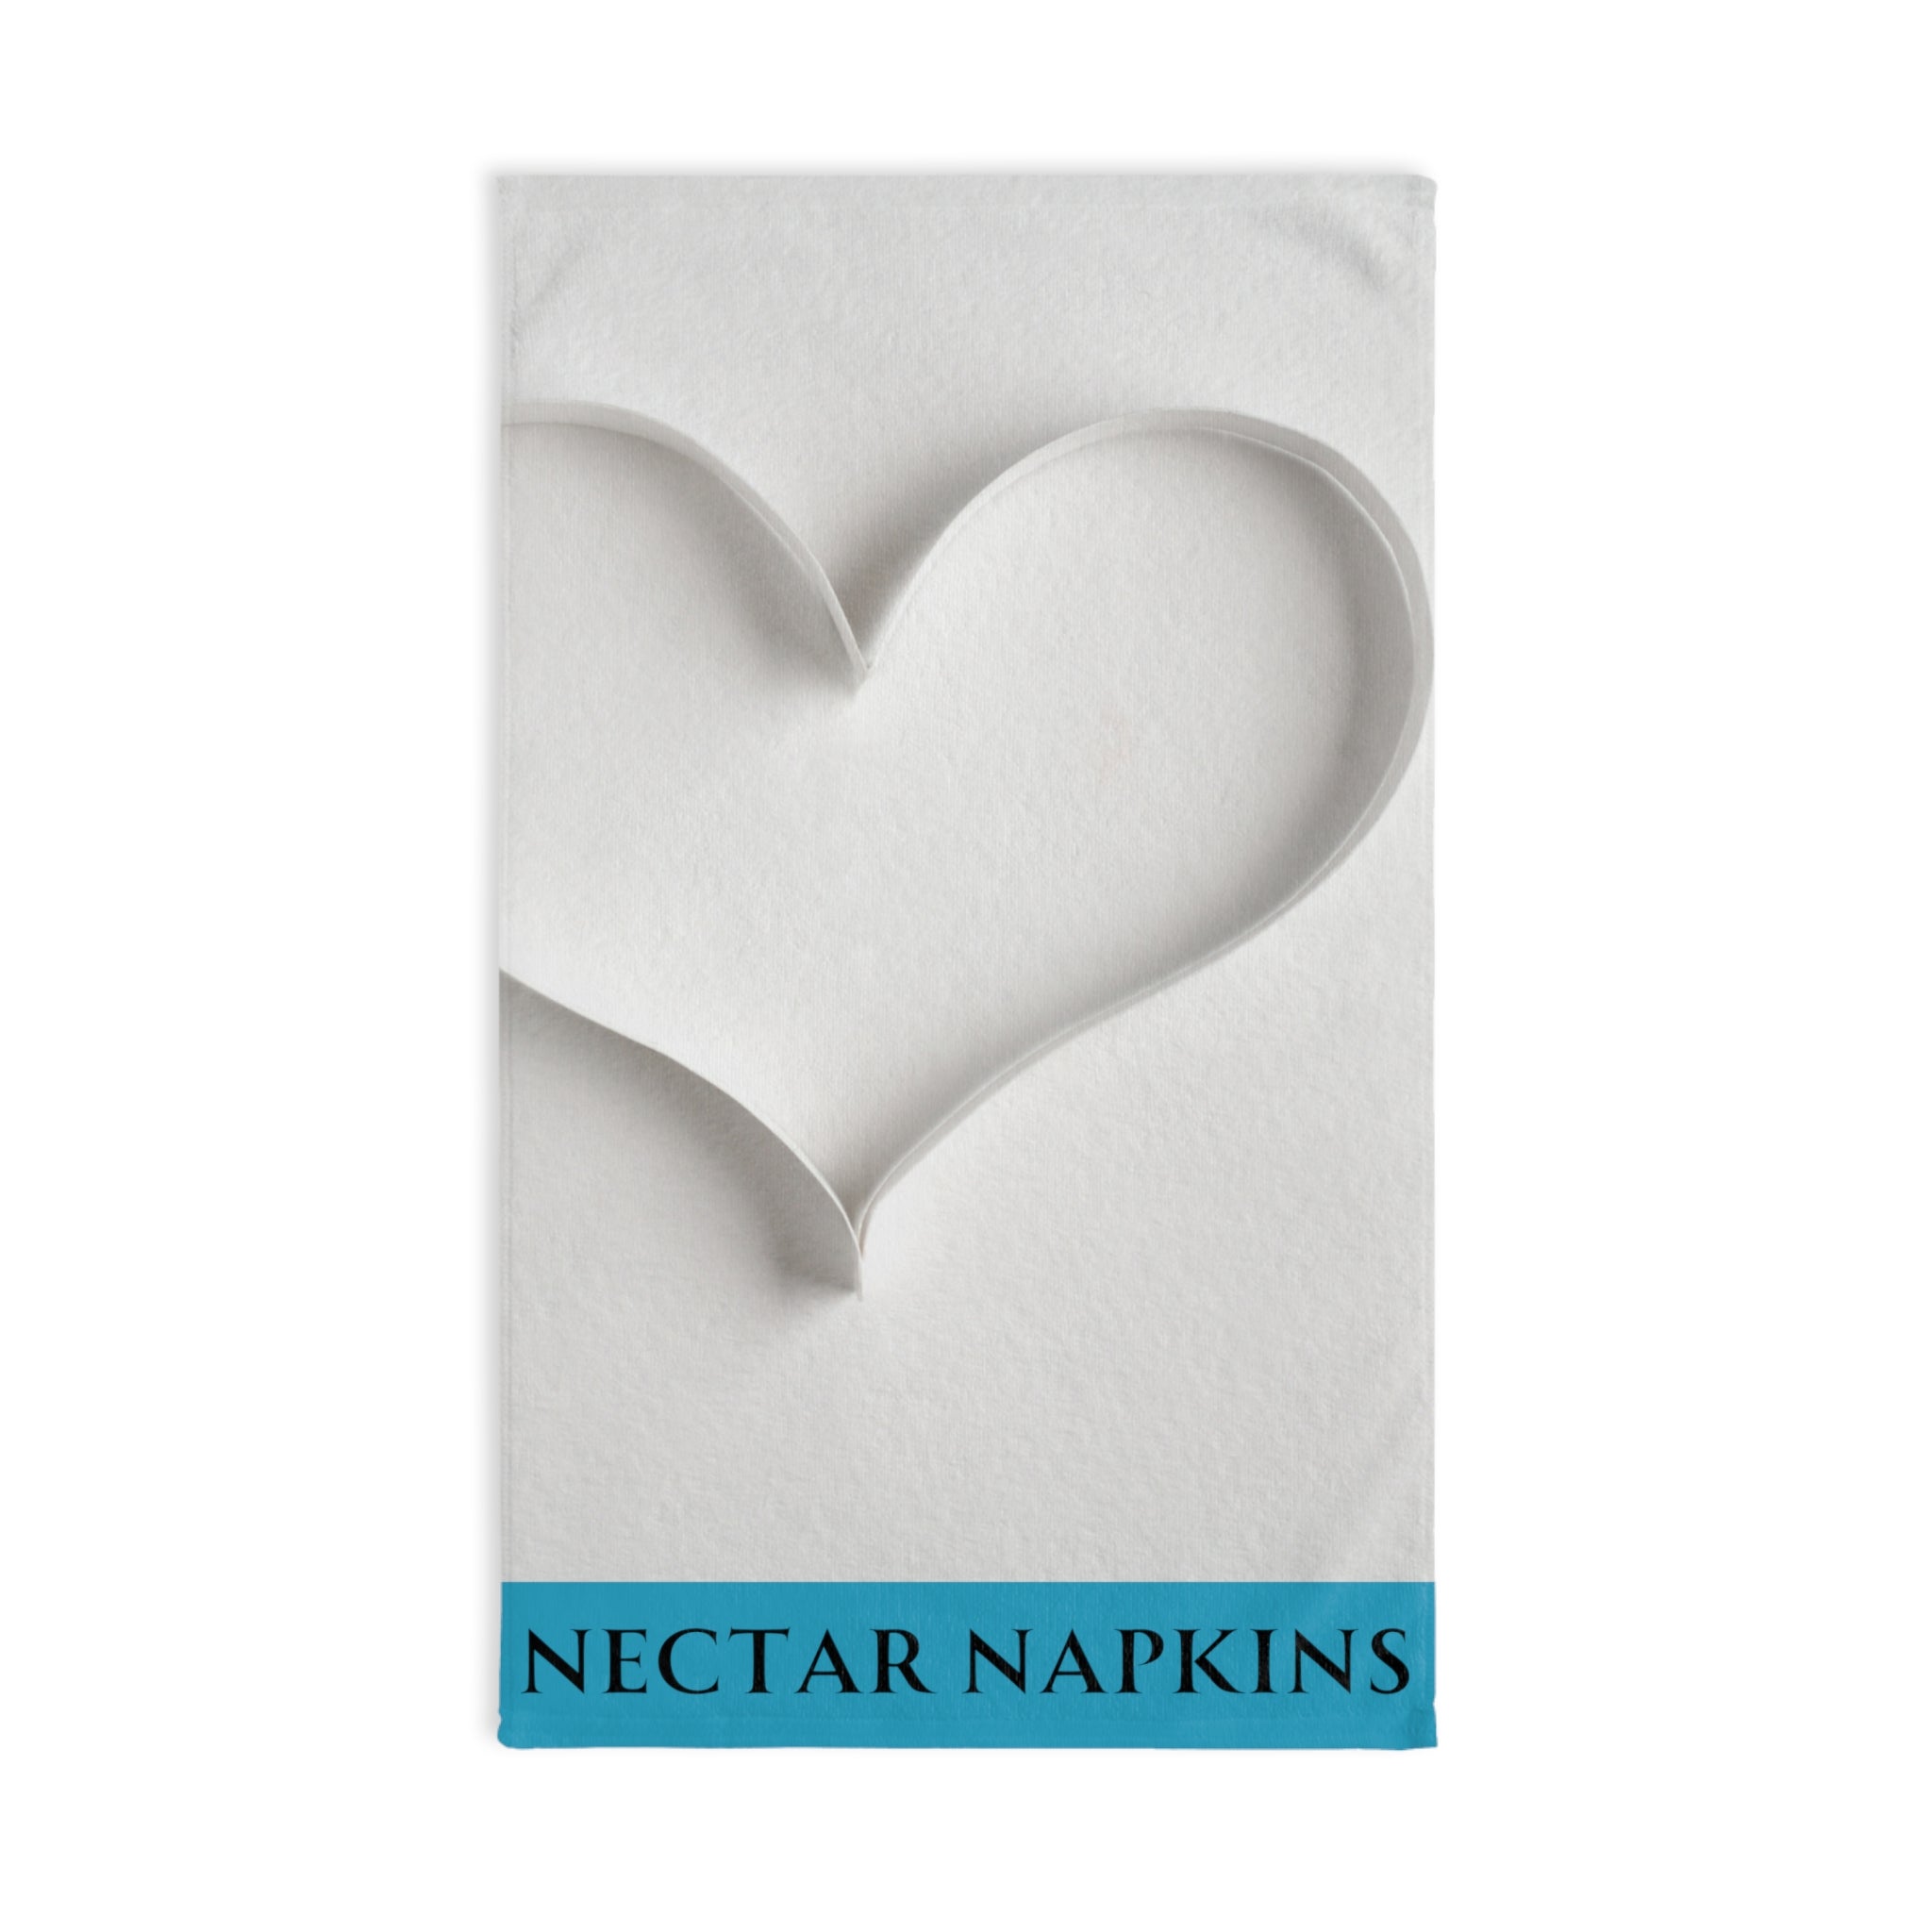 Paper Heart 3D Teal | Novelty Gifts for Boyfriend, Funny Towel Romantic Gift for Wedding Couple Fiance First Year Anniversary Valentines, Party Gag Gifts, Joke Humor Cloth for Husband Men BF NECTAR NAPKINS